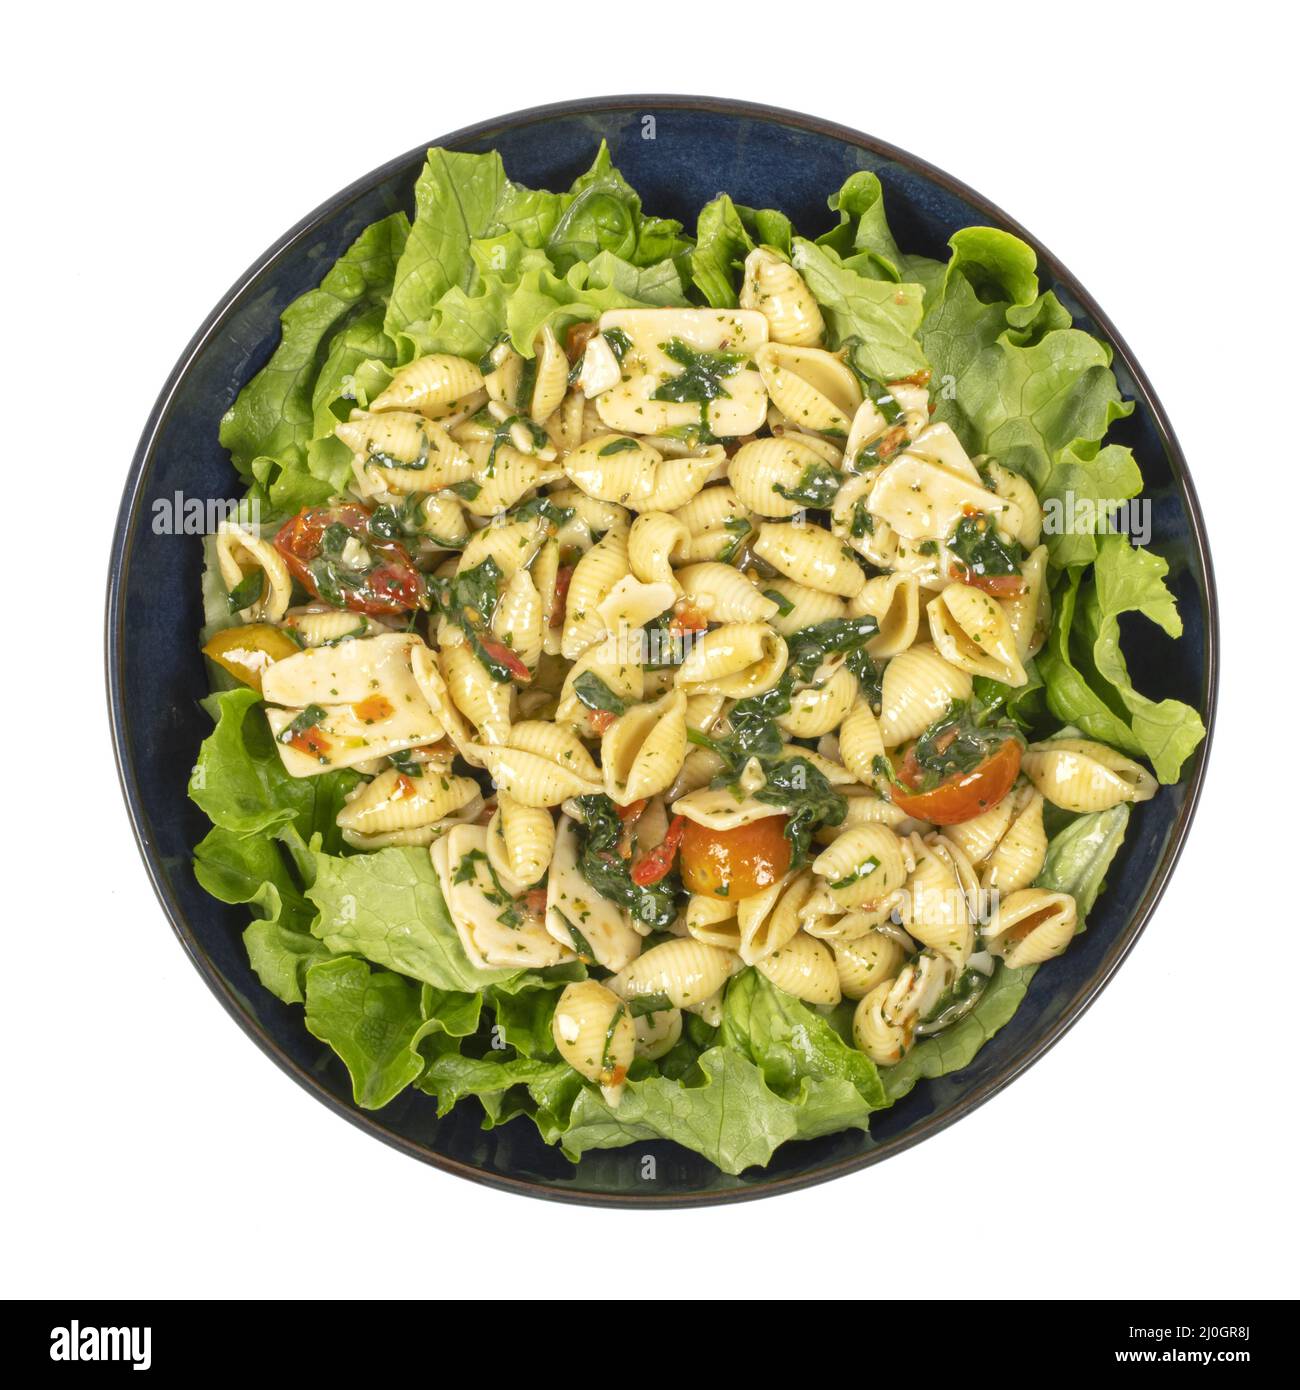 pasta salad in a bowl on white background Stock Photo